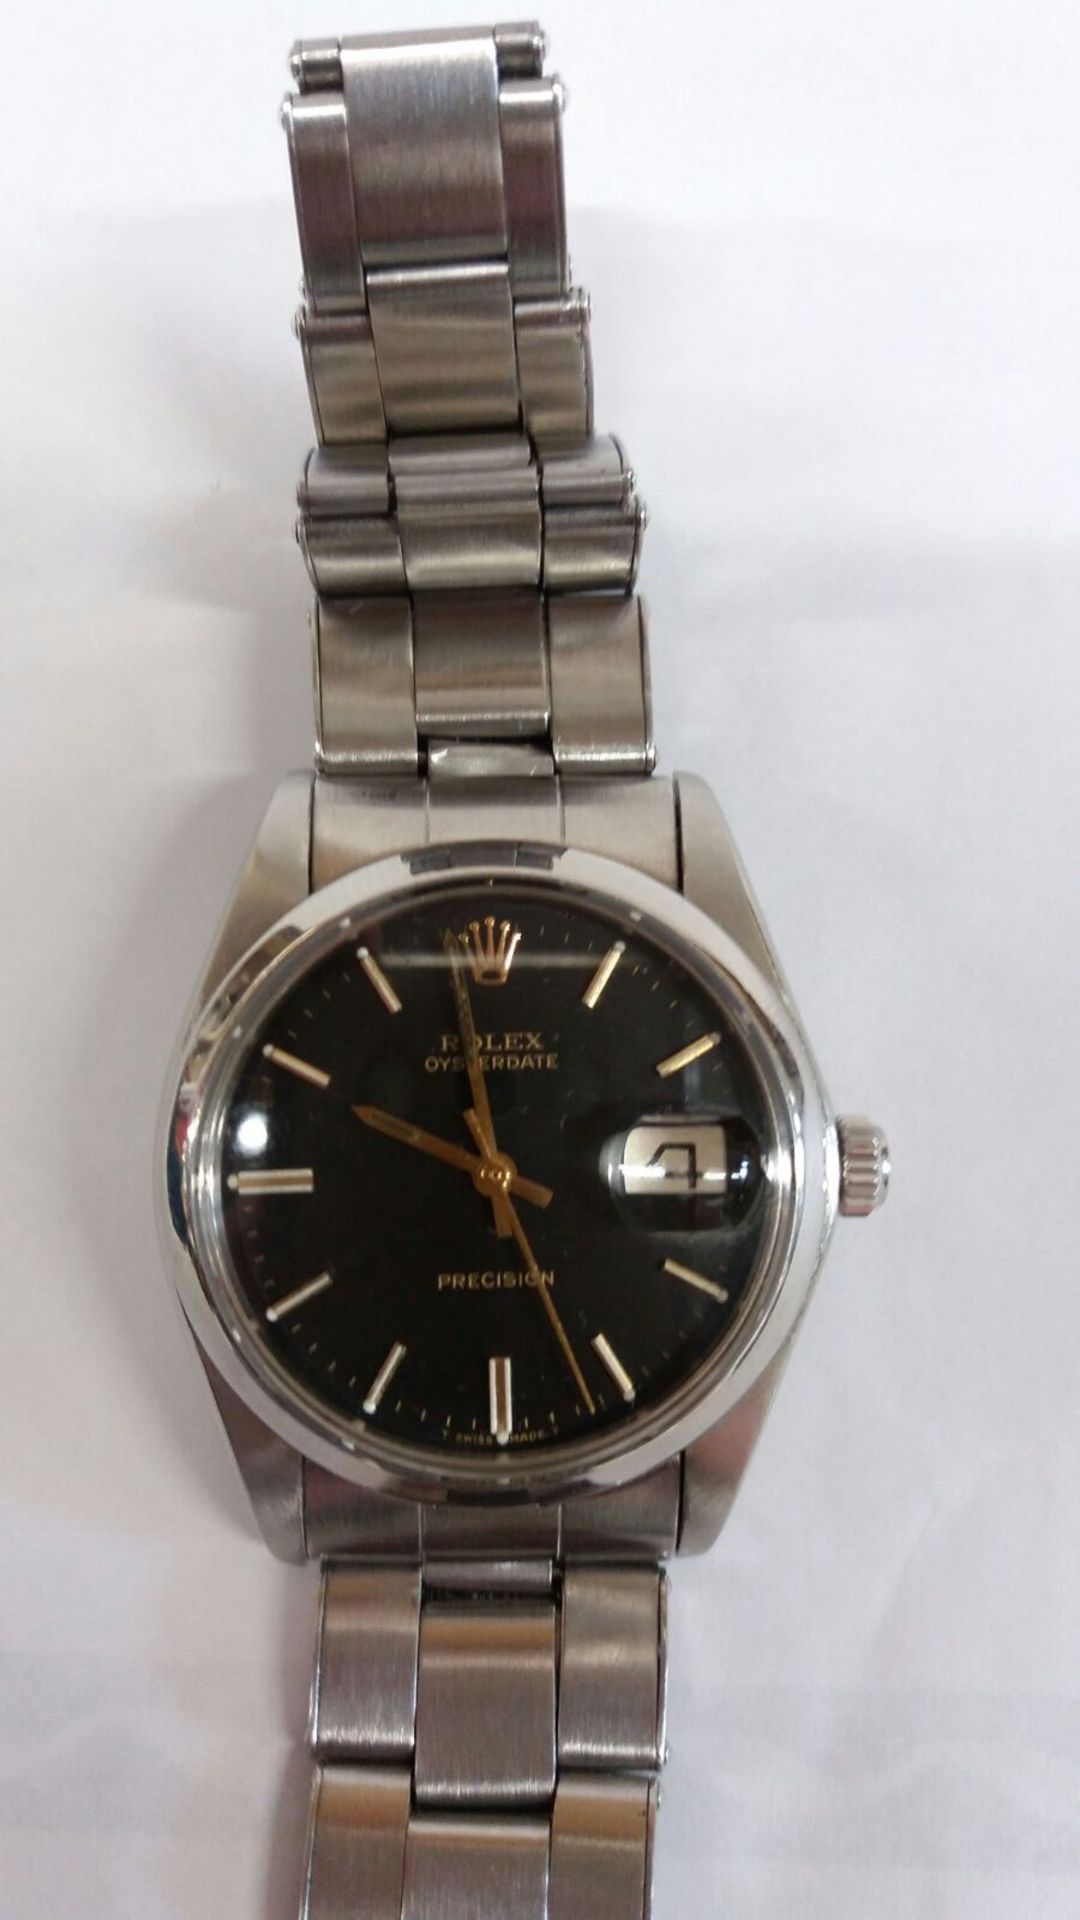 1973 Rolex OysterDate Precision - cal 6694, Fully Serviced. - Image 6 of 9